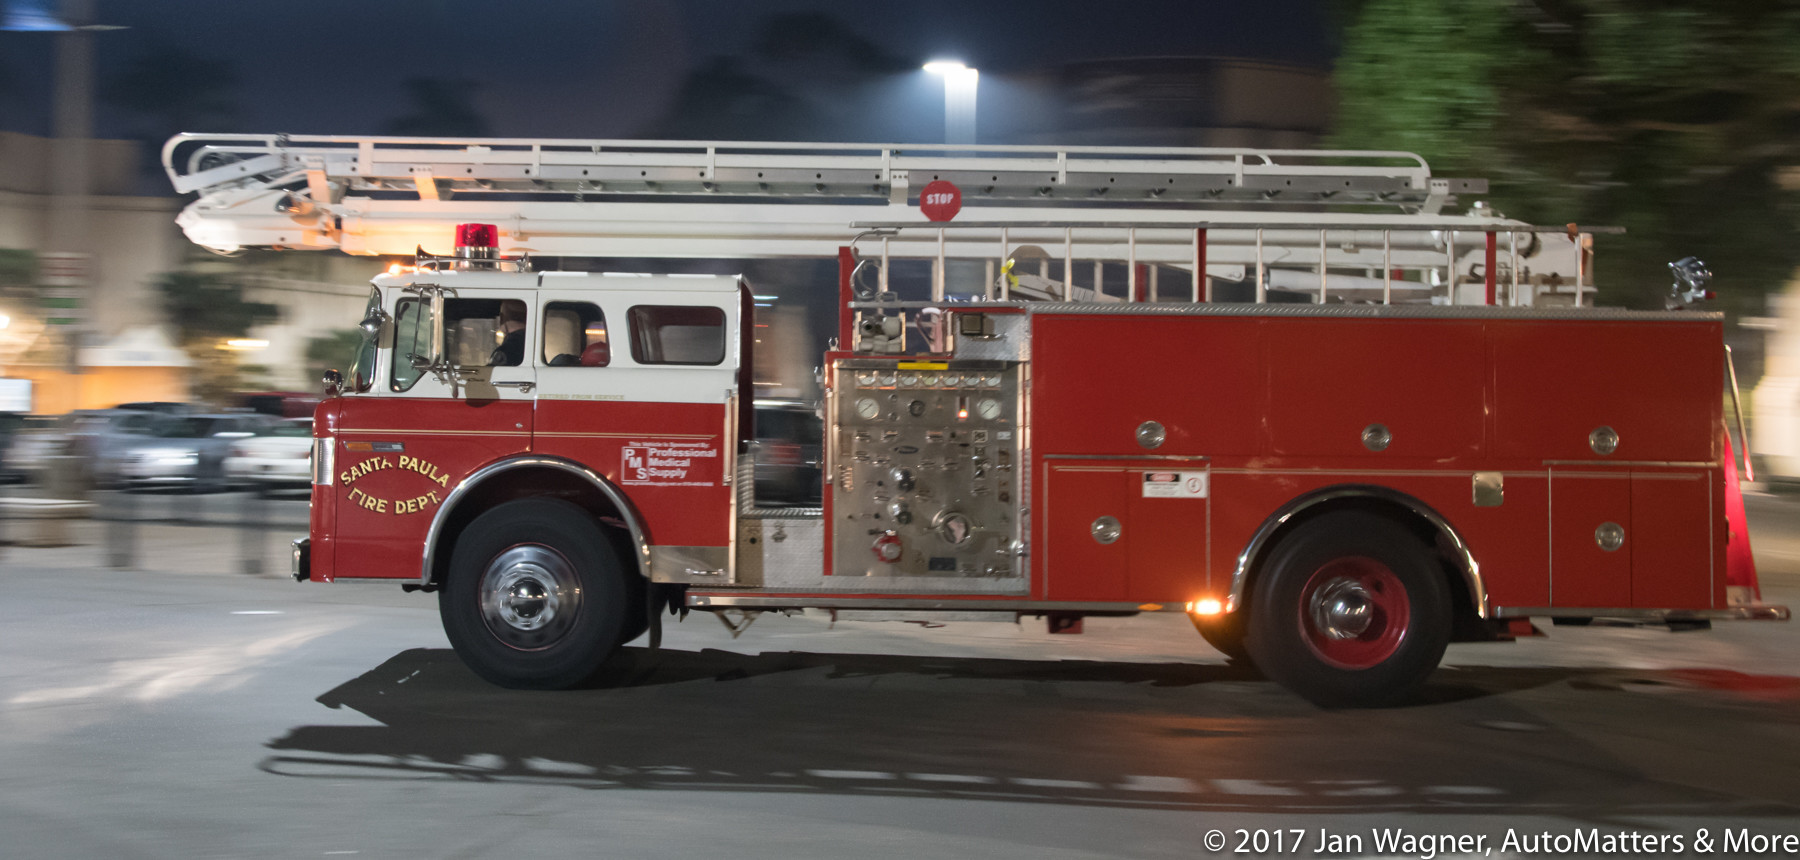 Recently retired fire engine on the road